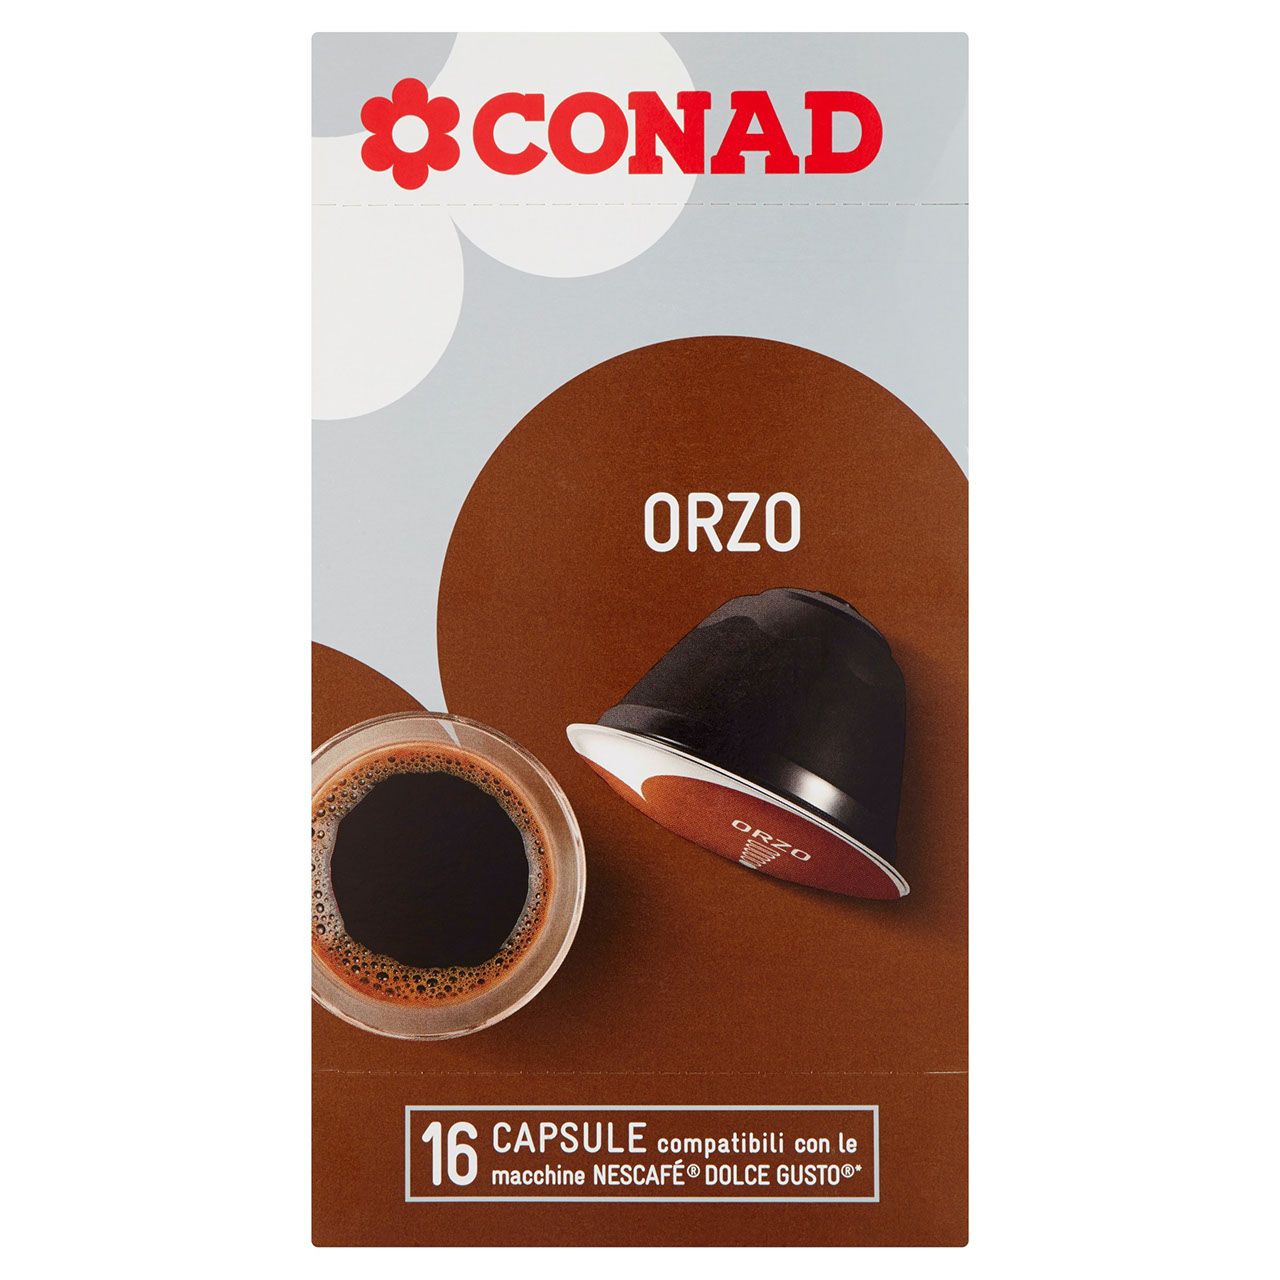 Top Drink Orzo - 16 capsules compatible with Dolce Gusto 